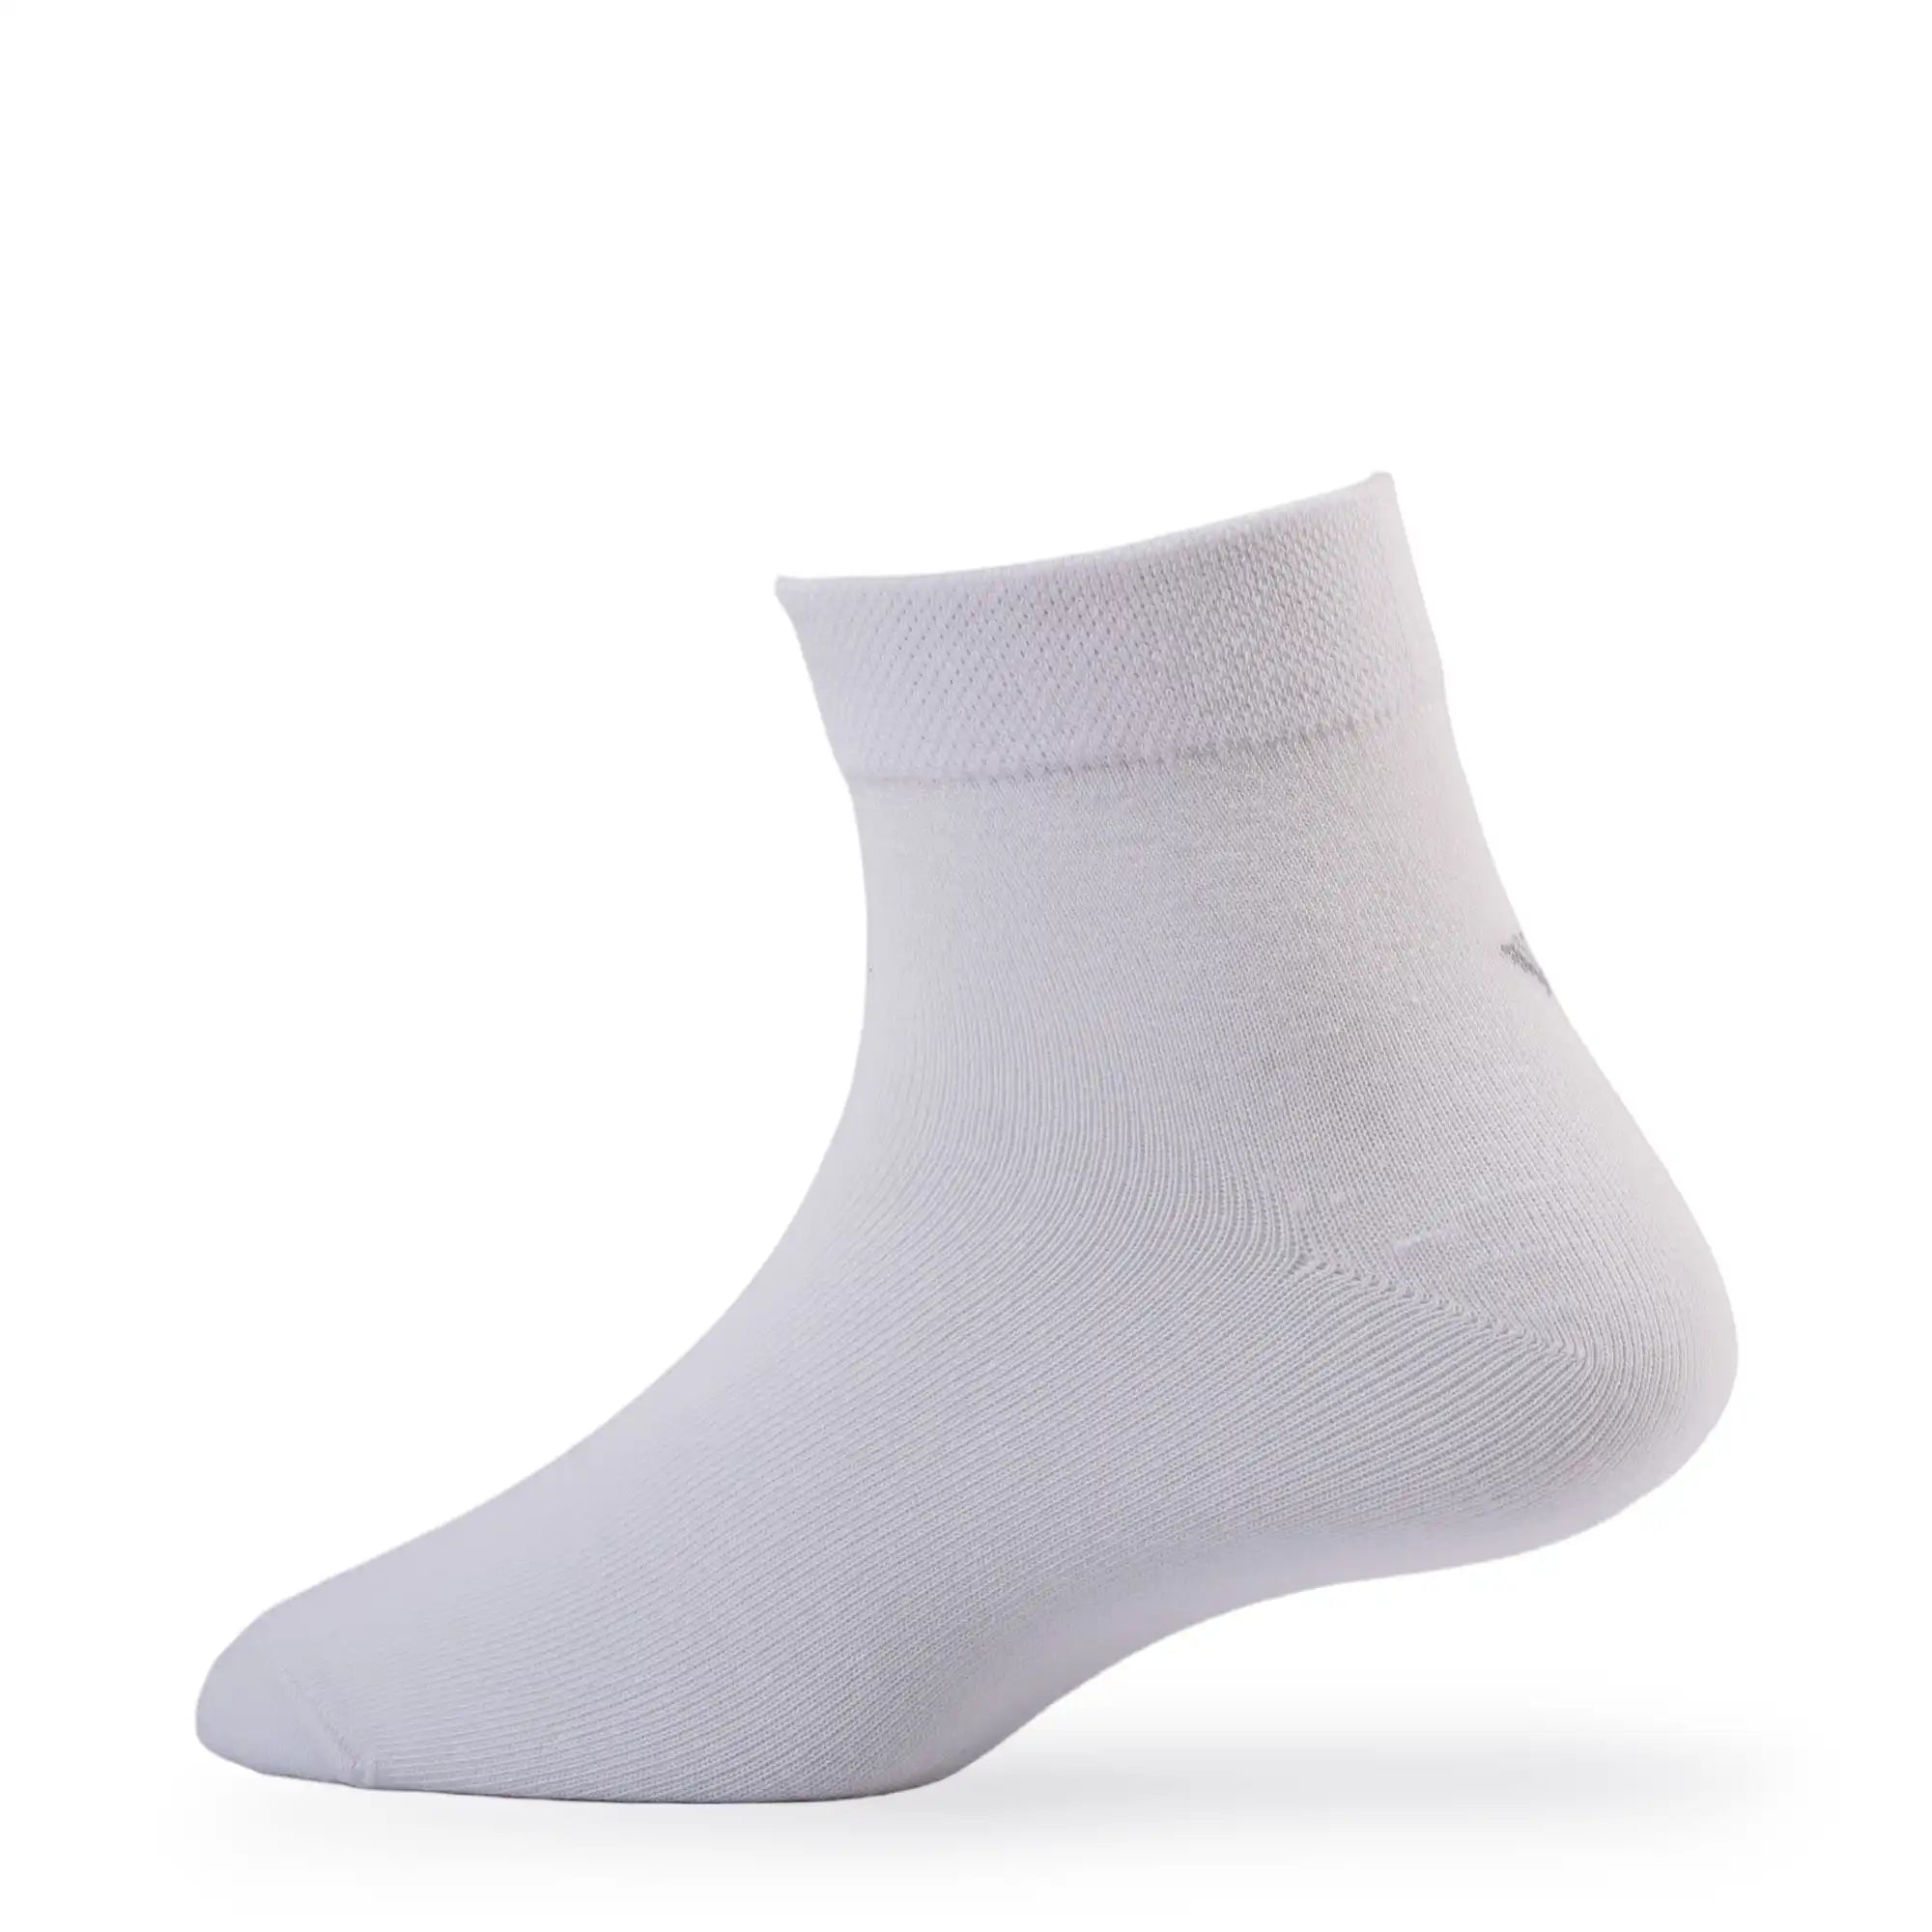 Young Wings Women's White Colour Cotton Fabric Solid Ankle Length Socks - Pack of 5, Style no. 5101-W1